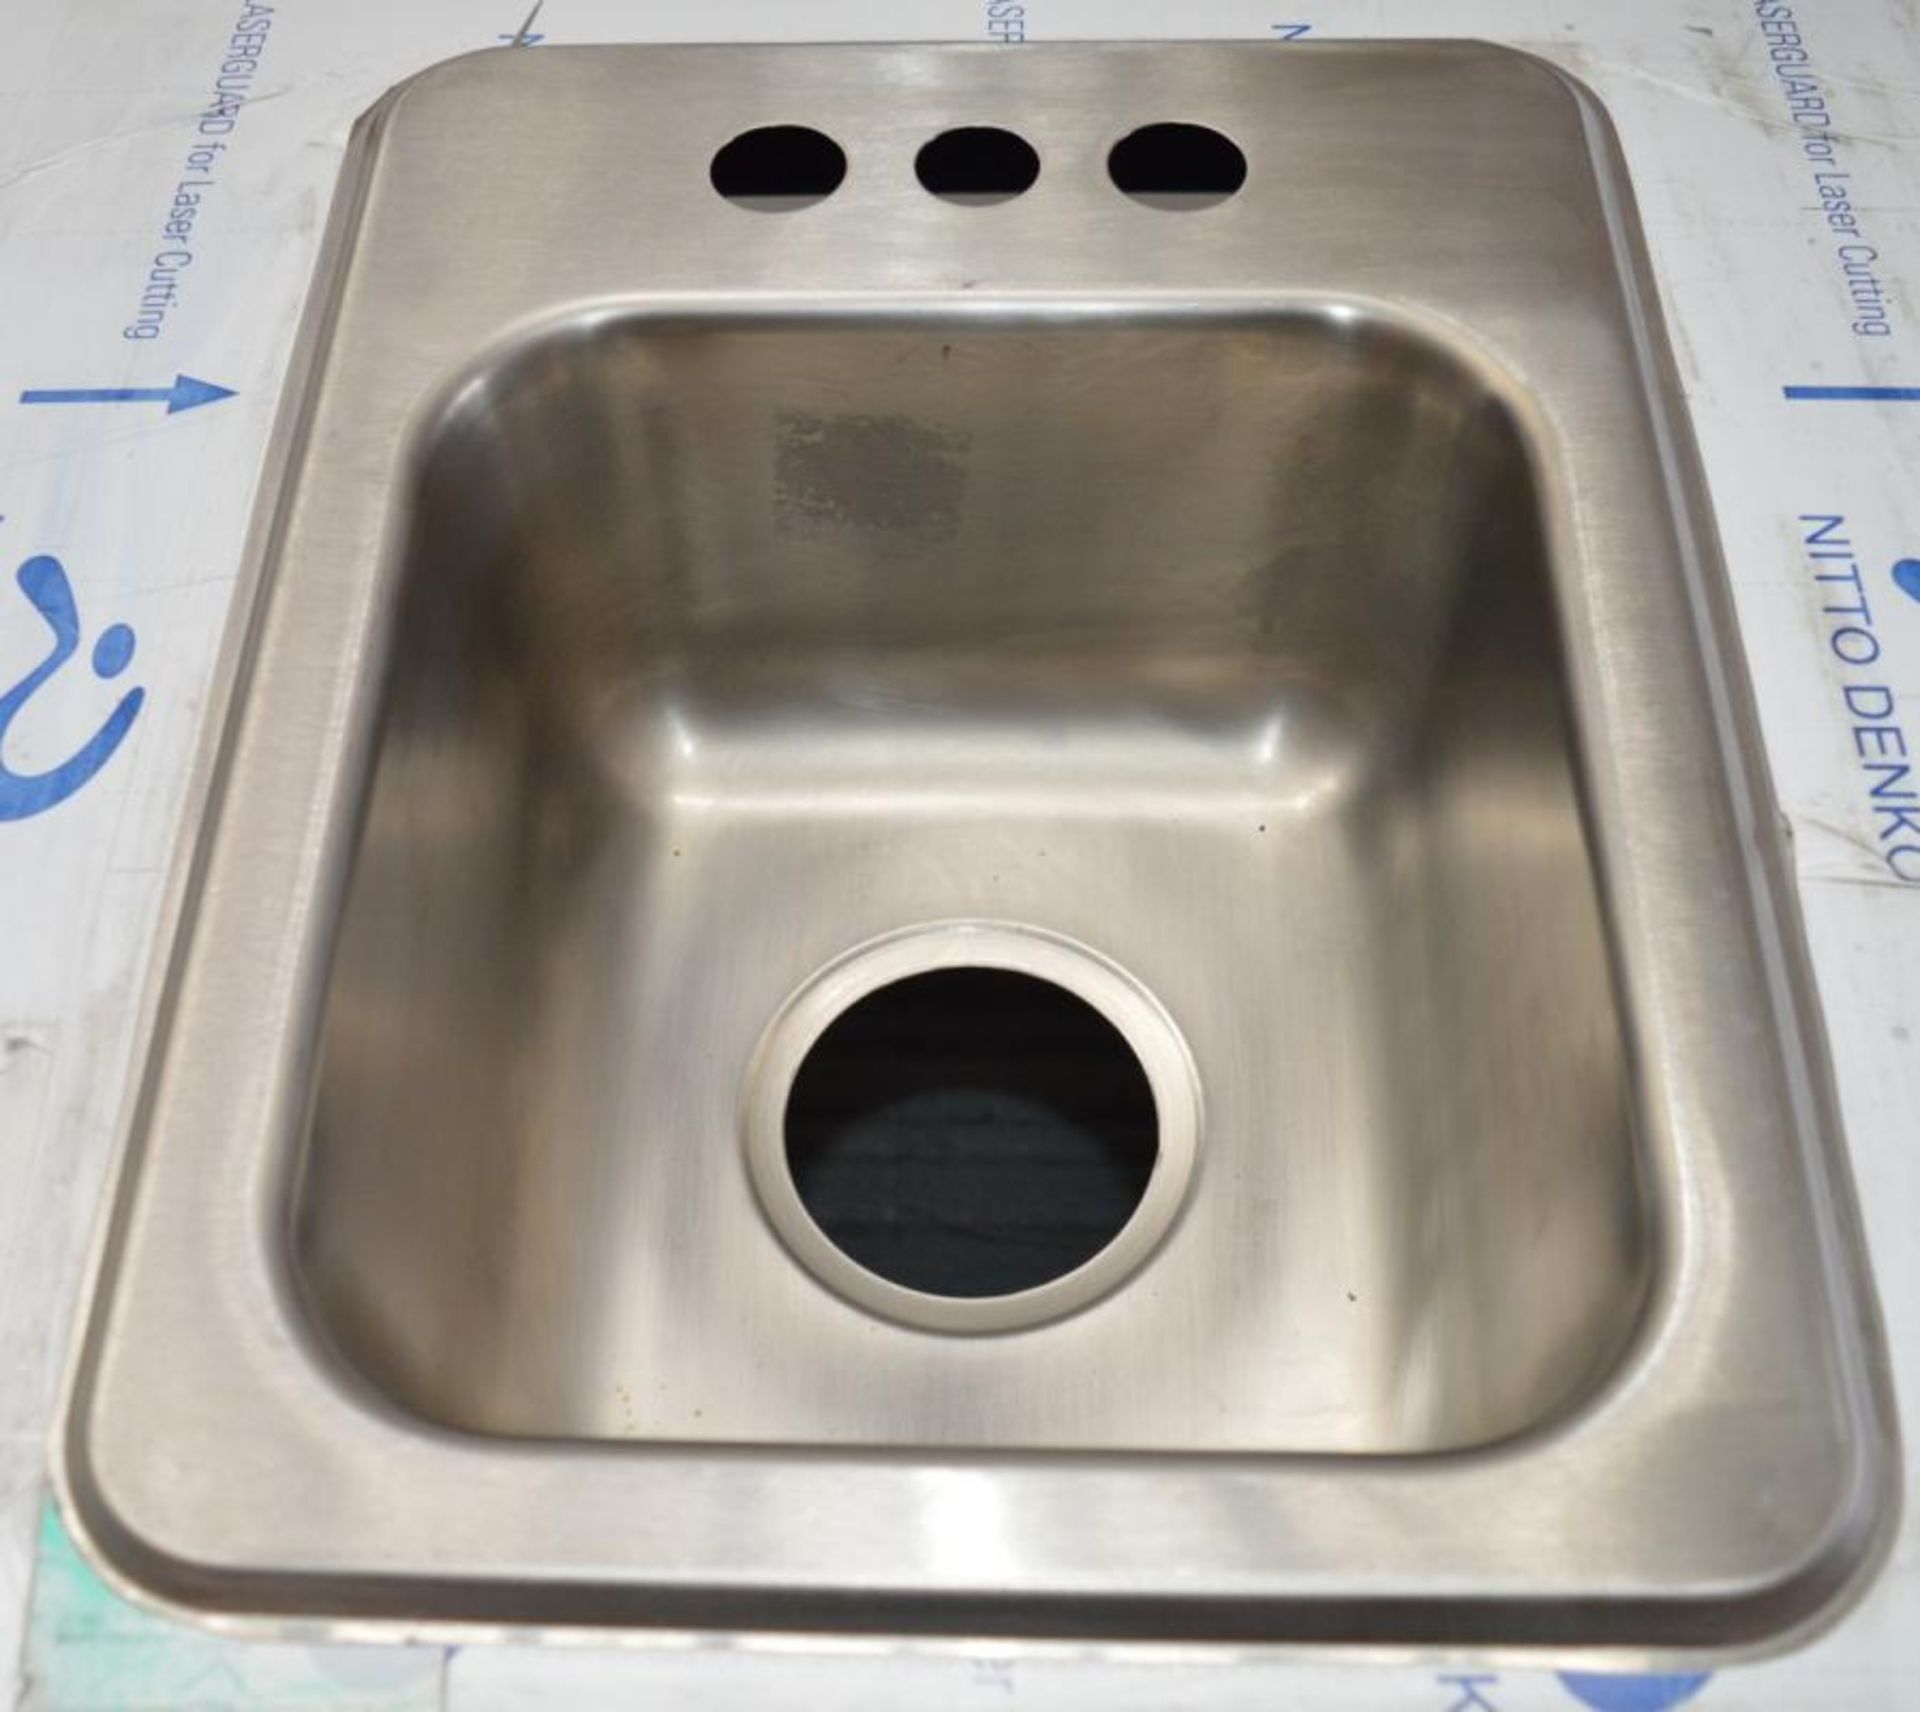 1 x Duke Stainless Steel Sink Basin Unit With Wood Finish Cabinet - Unused With Protective Film - Image 3 of 7